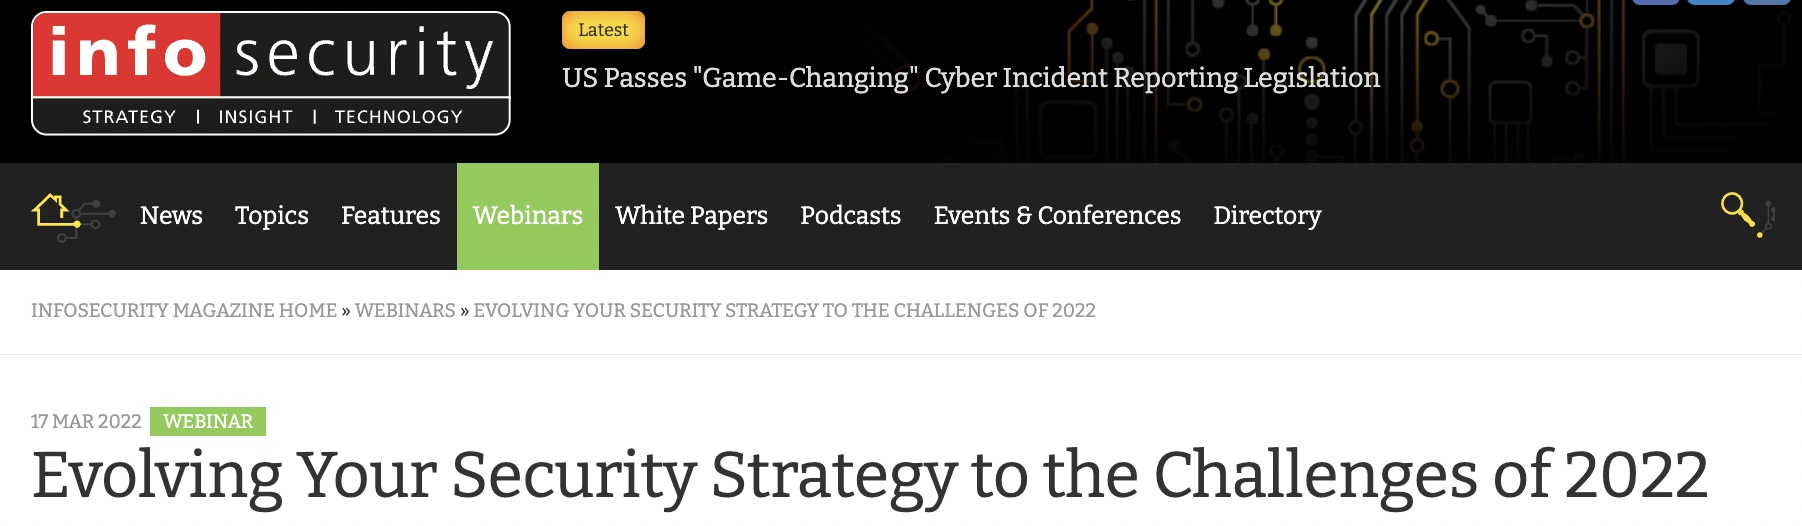 Professor Kevin Curran, Ulster University in an Infosecurity Magazine Webinar on the evolving threat landscape and expected trends for 2022, as well as the growth of crowd security and how it works.